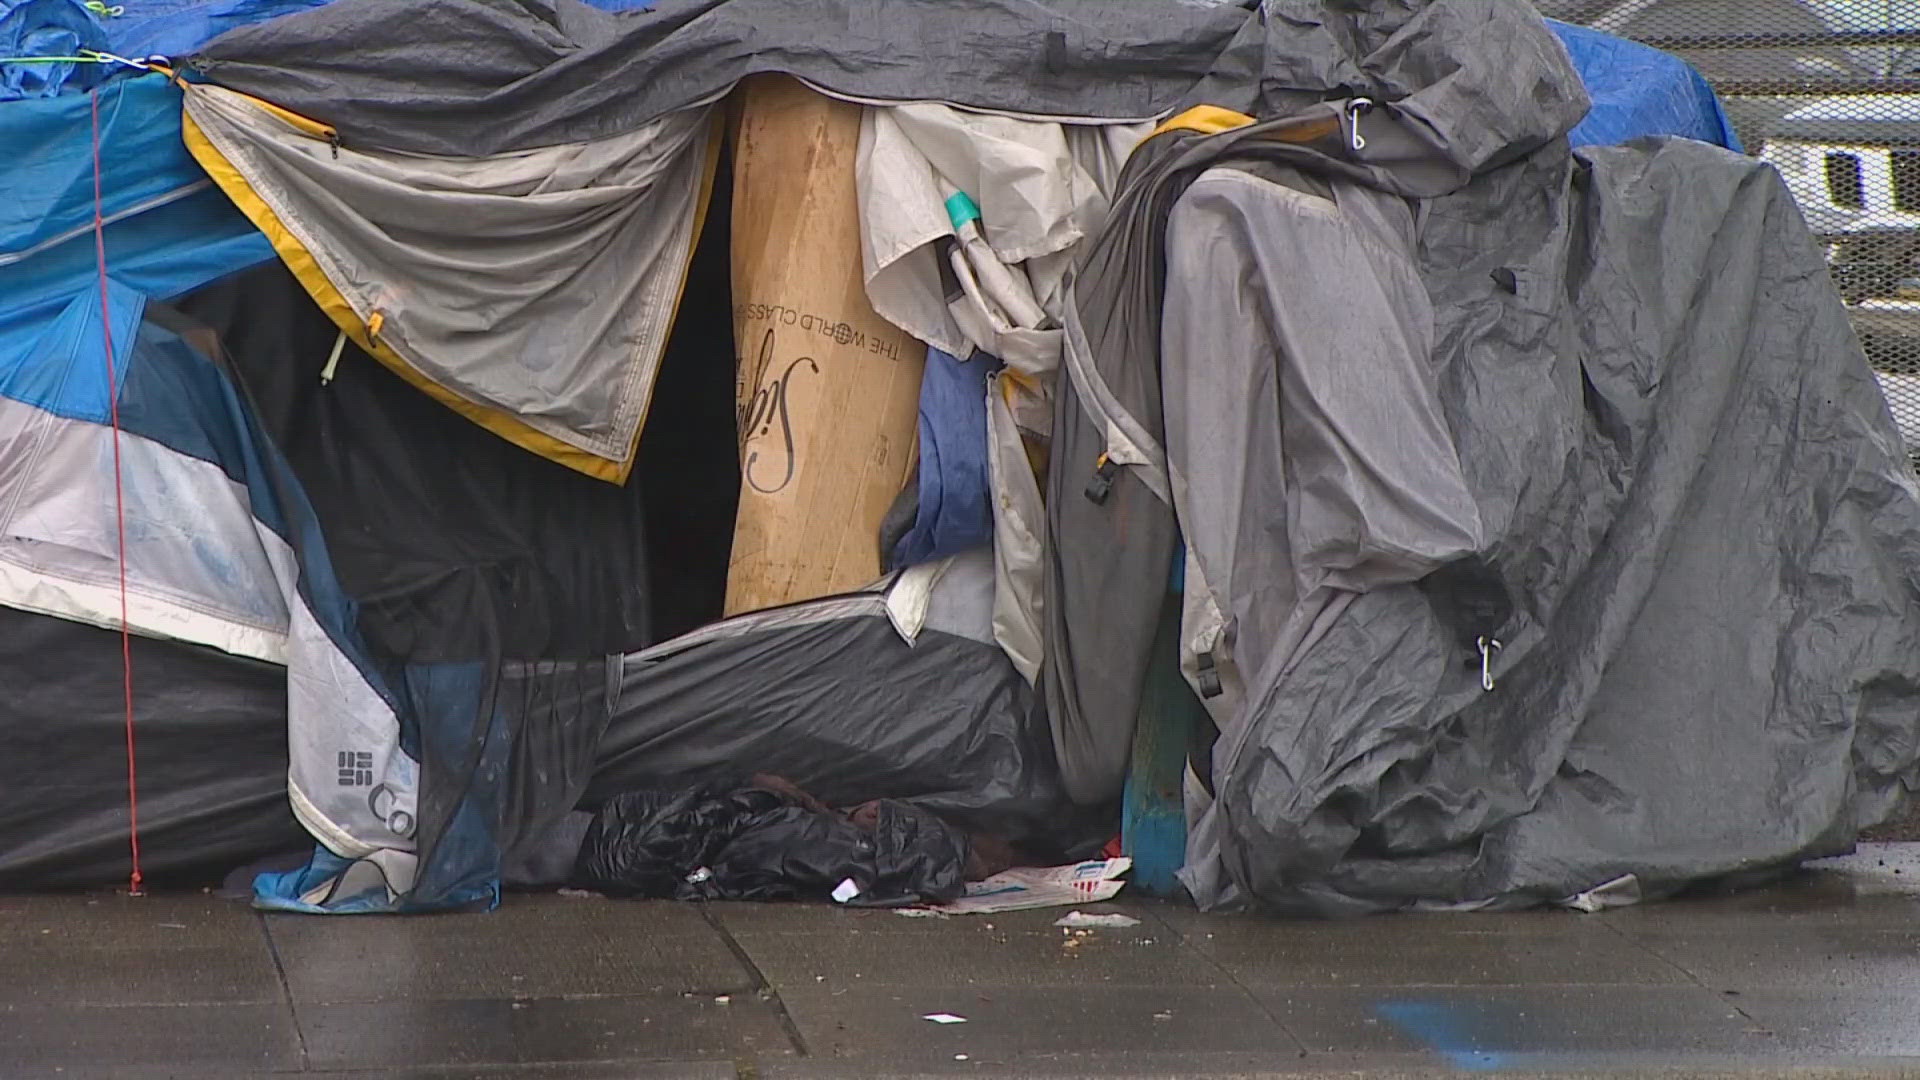 Burien business owners urged the city and King County Sheriff's Office to come to an agreement on enforcement of the camping ban ordinance.